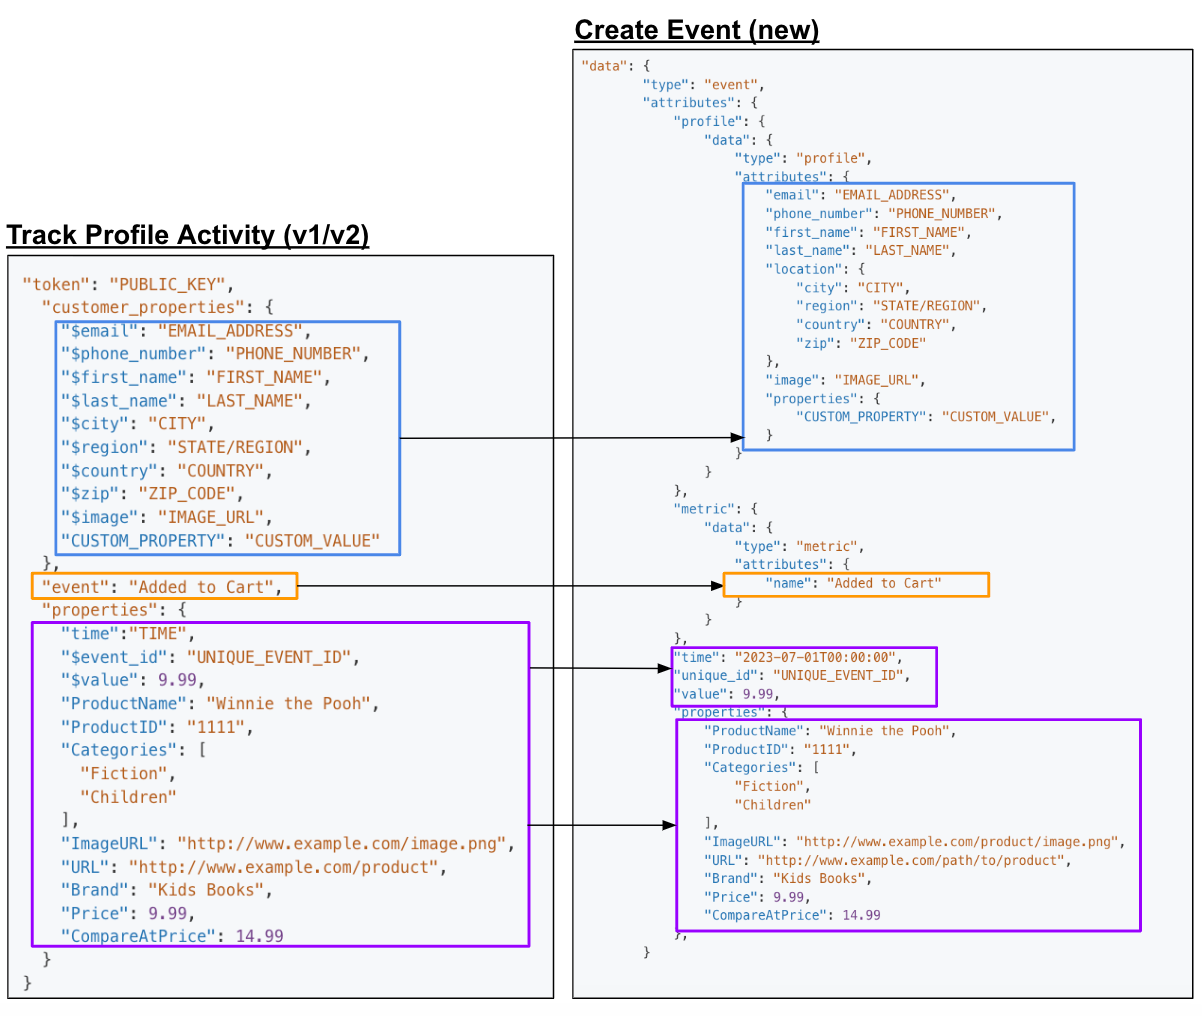 Digram showing relationship between Track endpoint and Create Event endpoint, mapping their properties